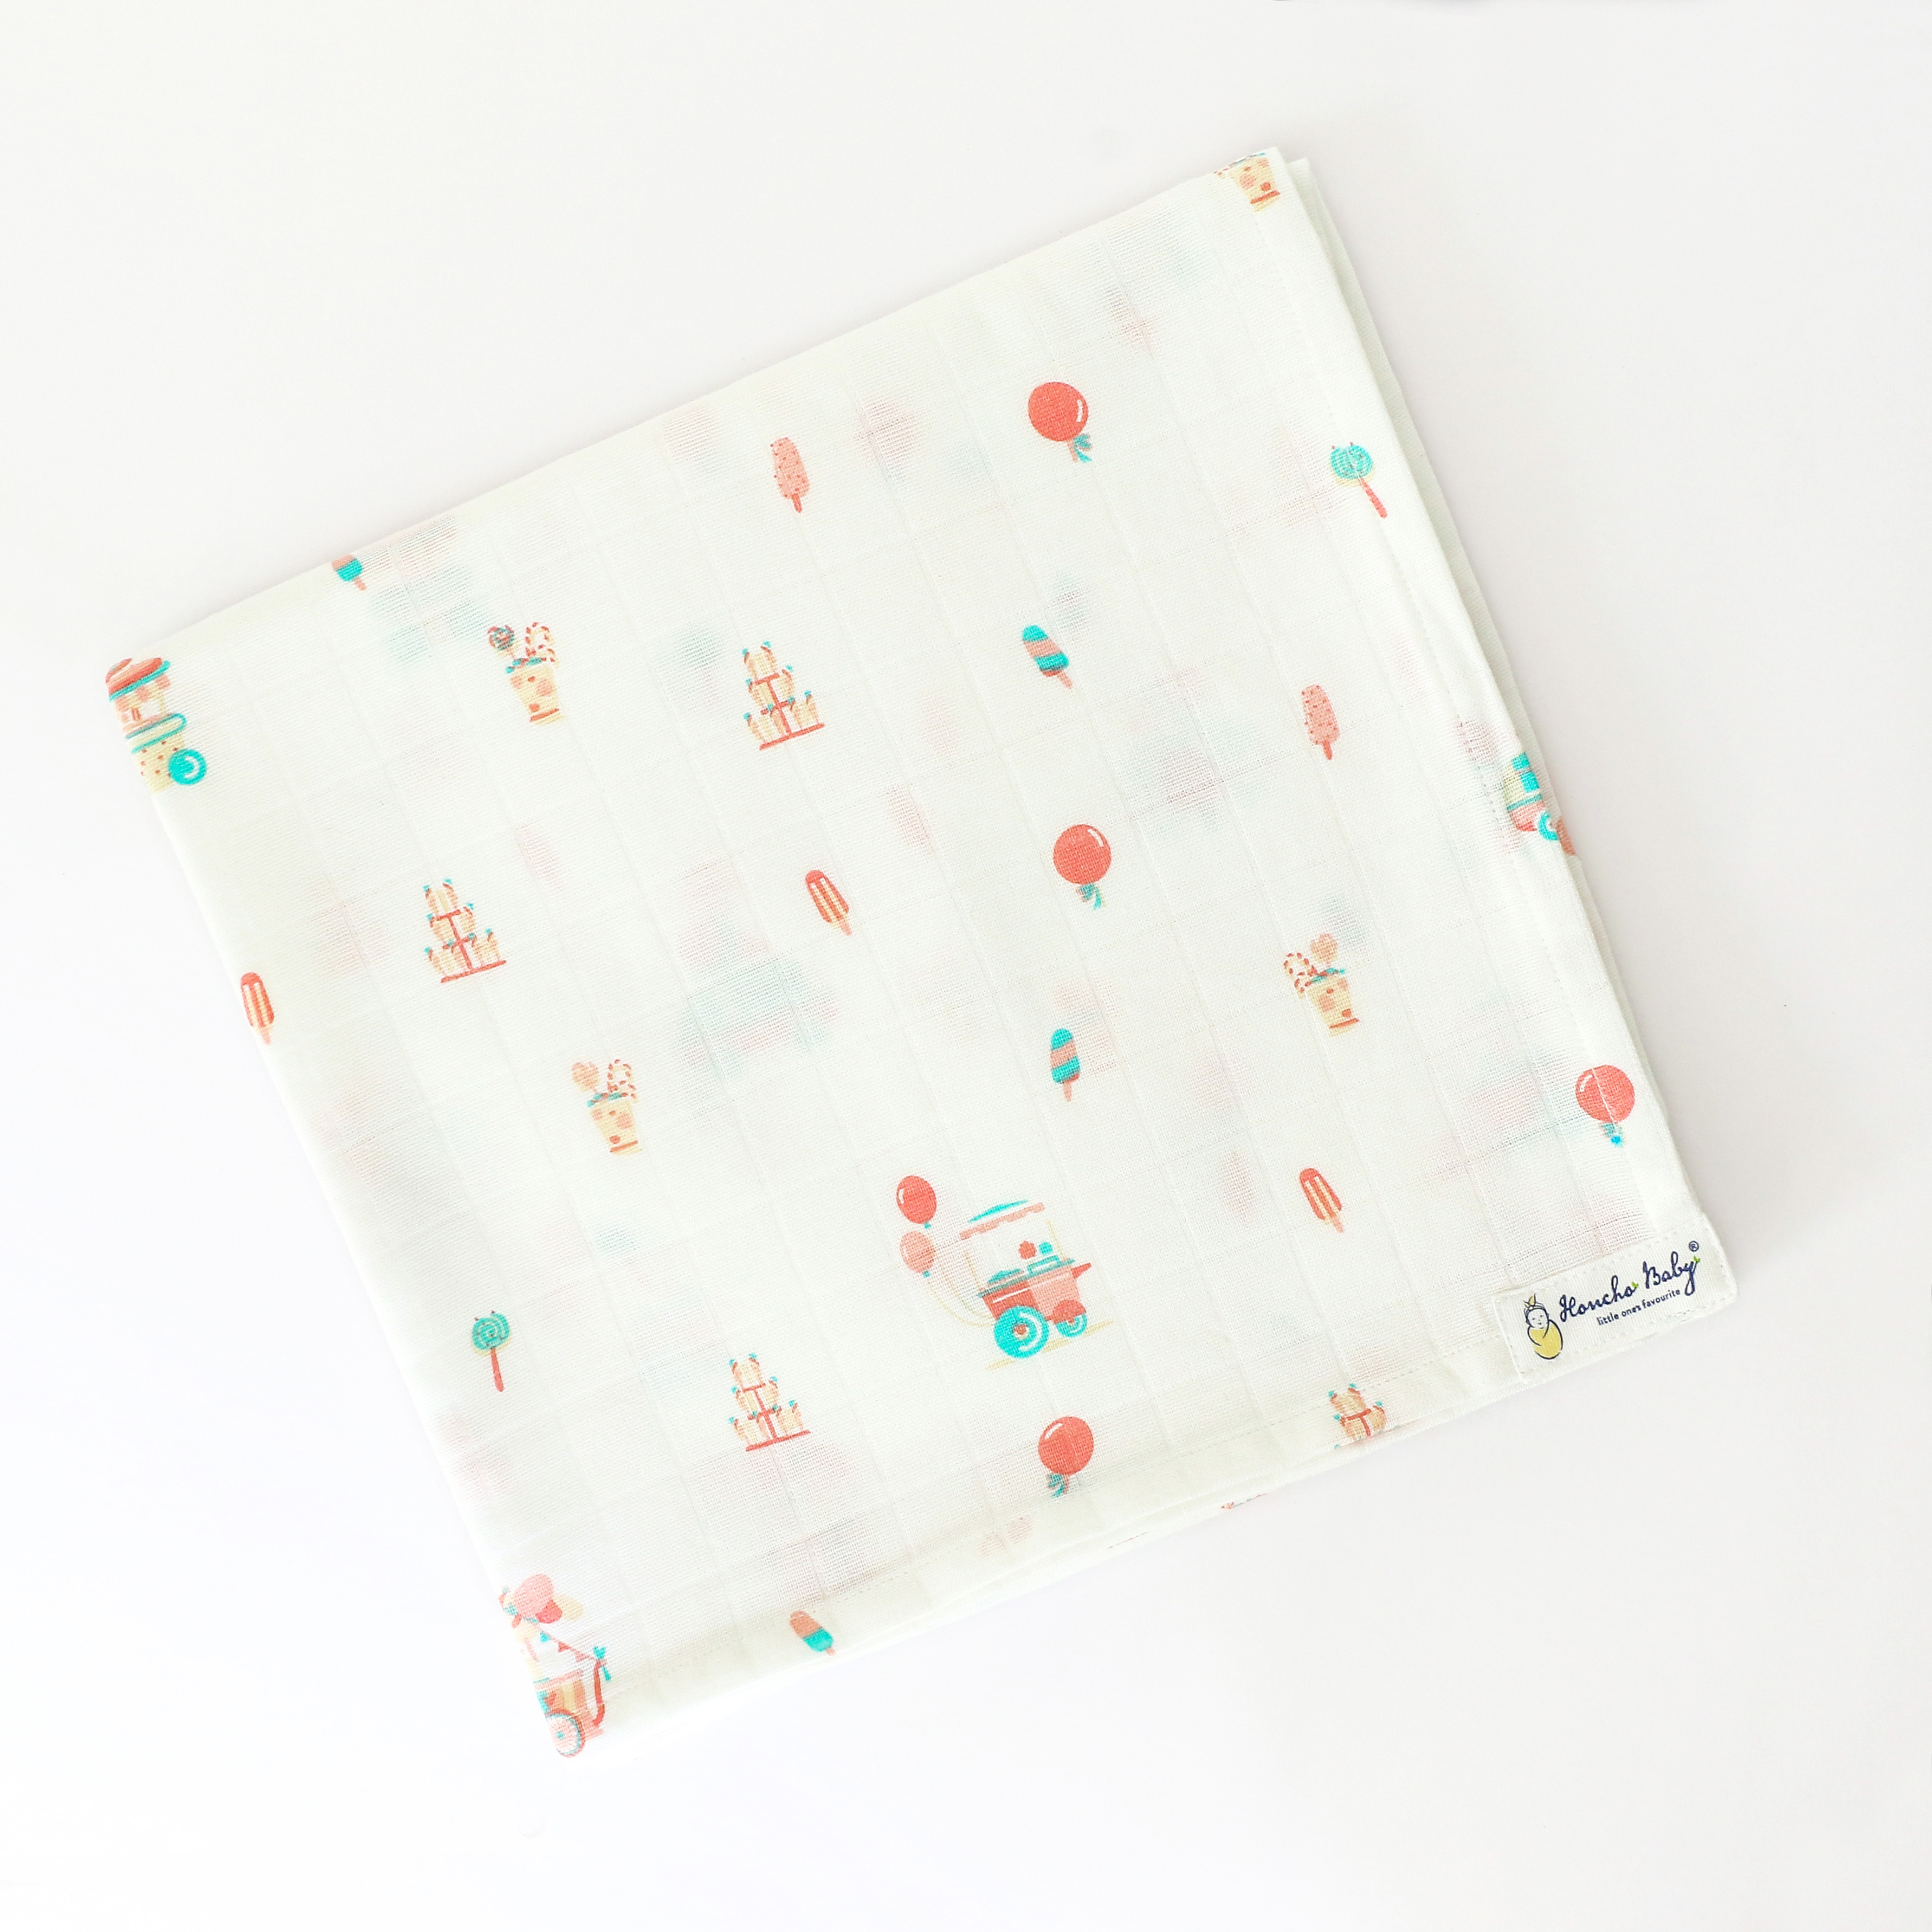 I hear the Ice Cream truck! -Organic Cotton (double layer)Baby Muslin Swaddle/Blanket - 110X110 cms